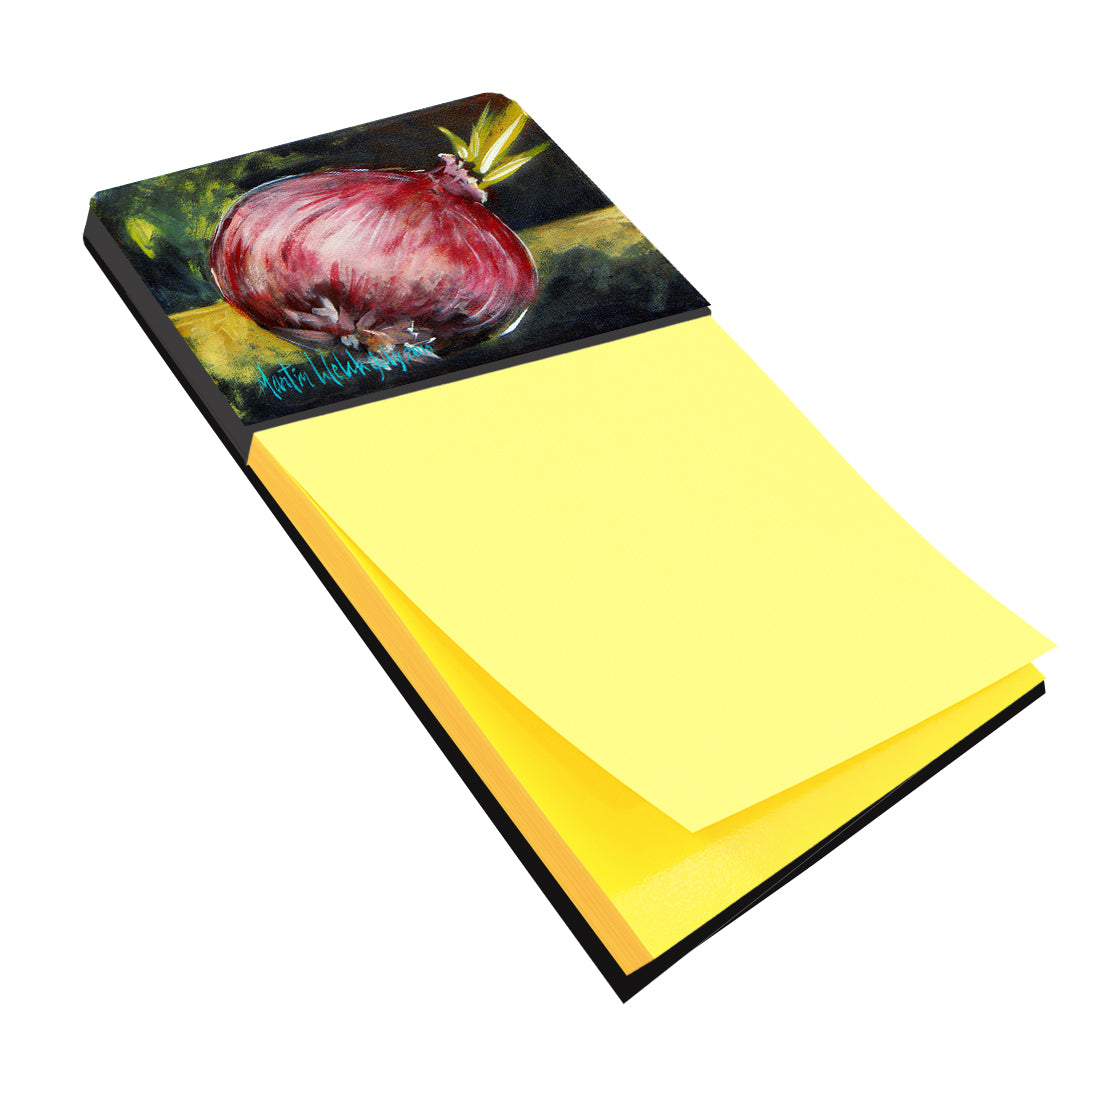 Buy this Vegetables - Onion One-Yun Sticky Note Holder